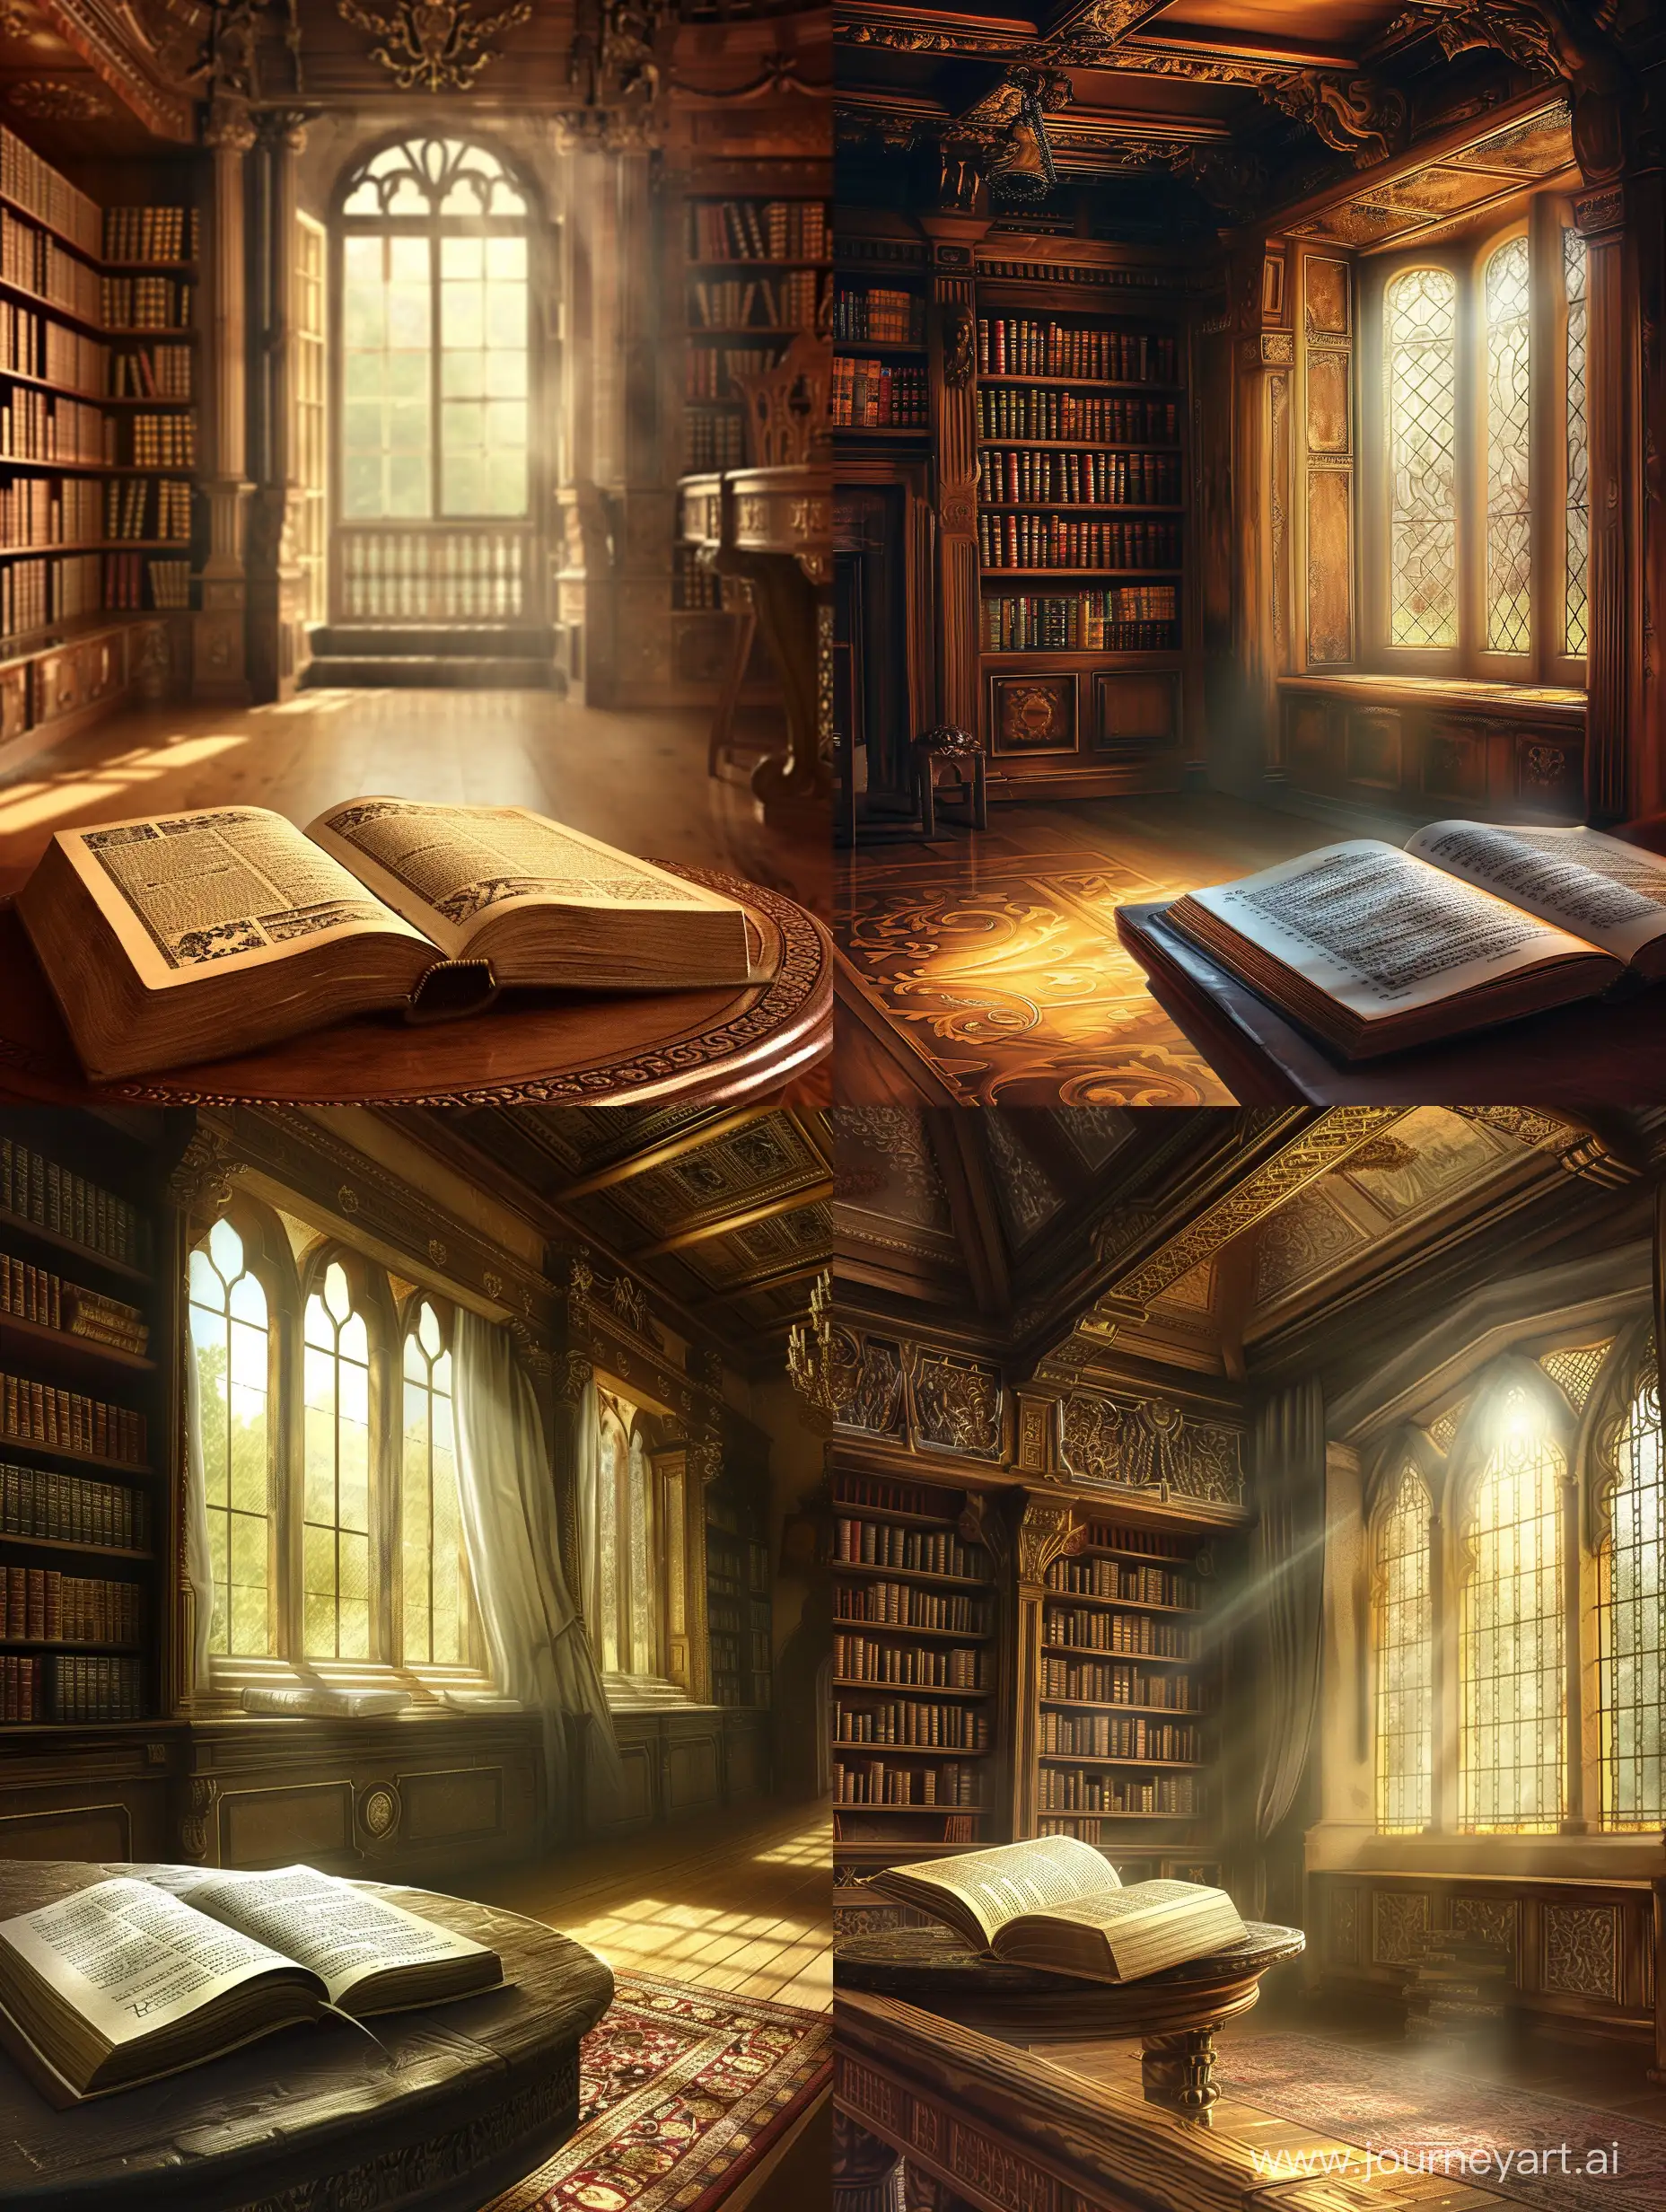 an old and luxury room with an open English book from near on the table and a library, like the room of Shakespeare with a lightfull window. i want a background image for a cover of a magazine about English and language. very beautiful, colorful and high resolution one. show language and English by this image. realistic one. clear not fuzzy.